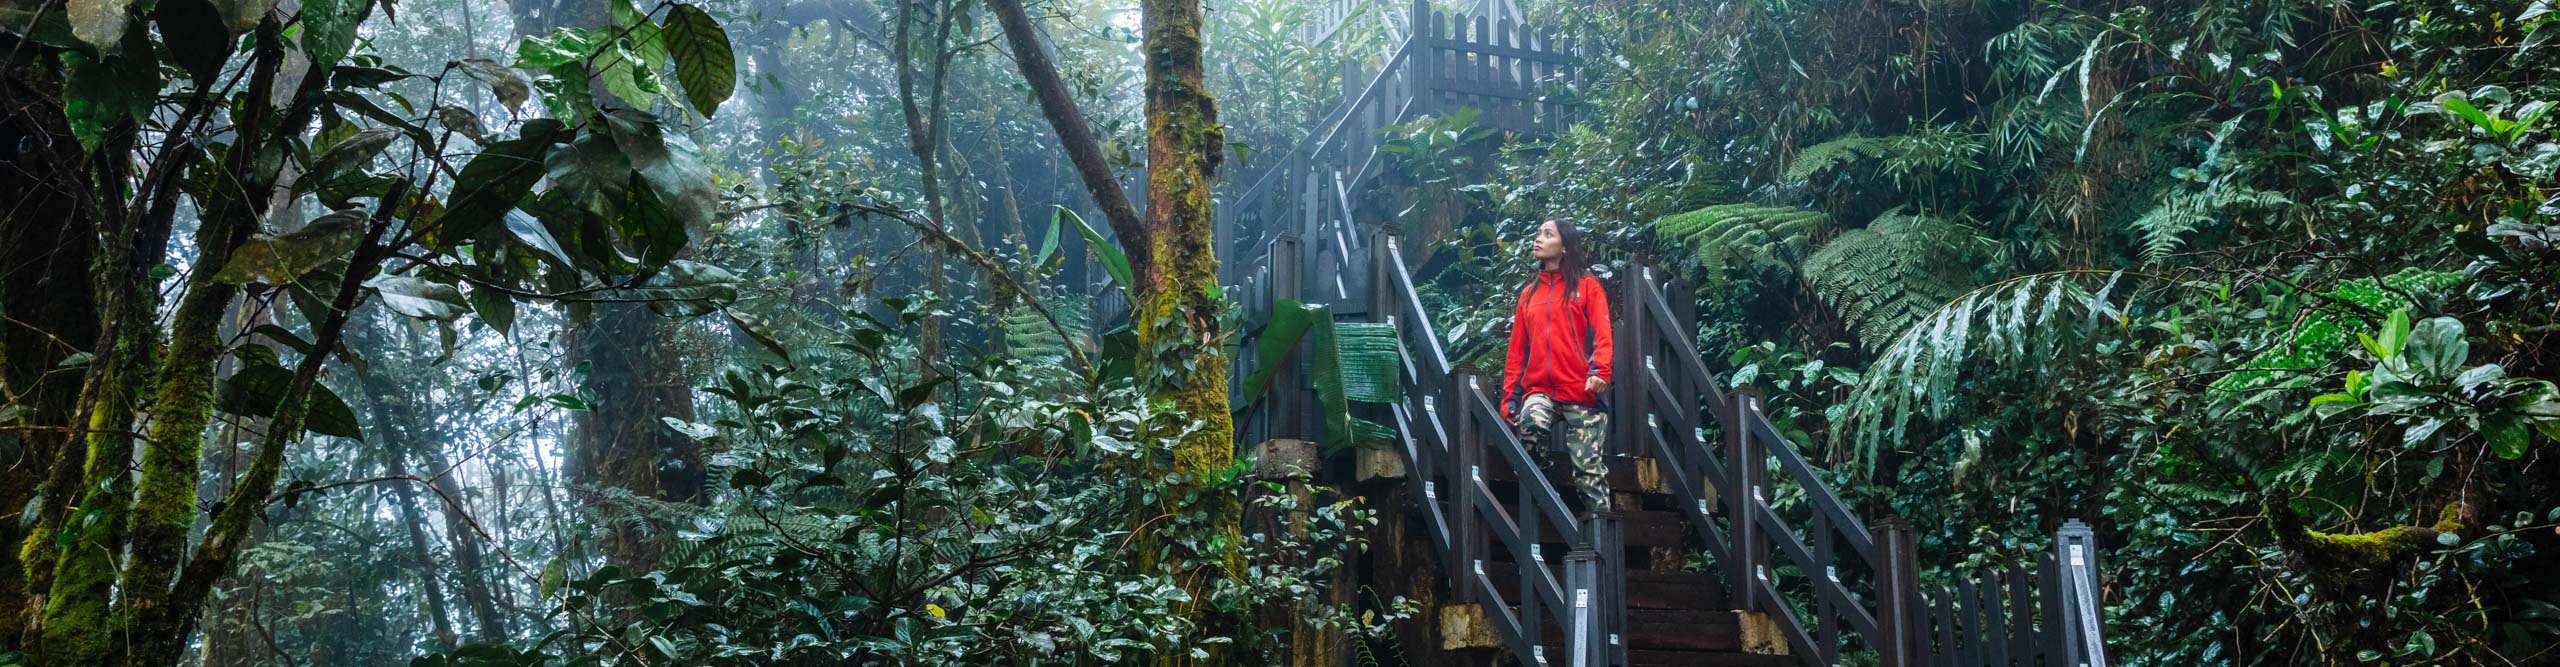 Woman walking in the rainforest on a rainy day, Cameron Highlands, Pahang, Malaysia